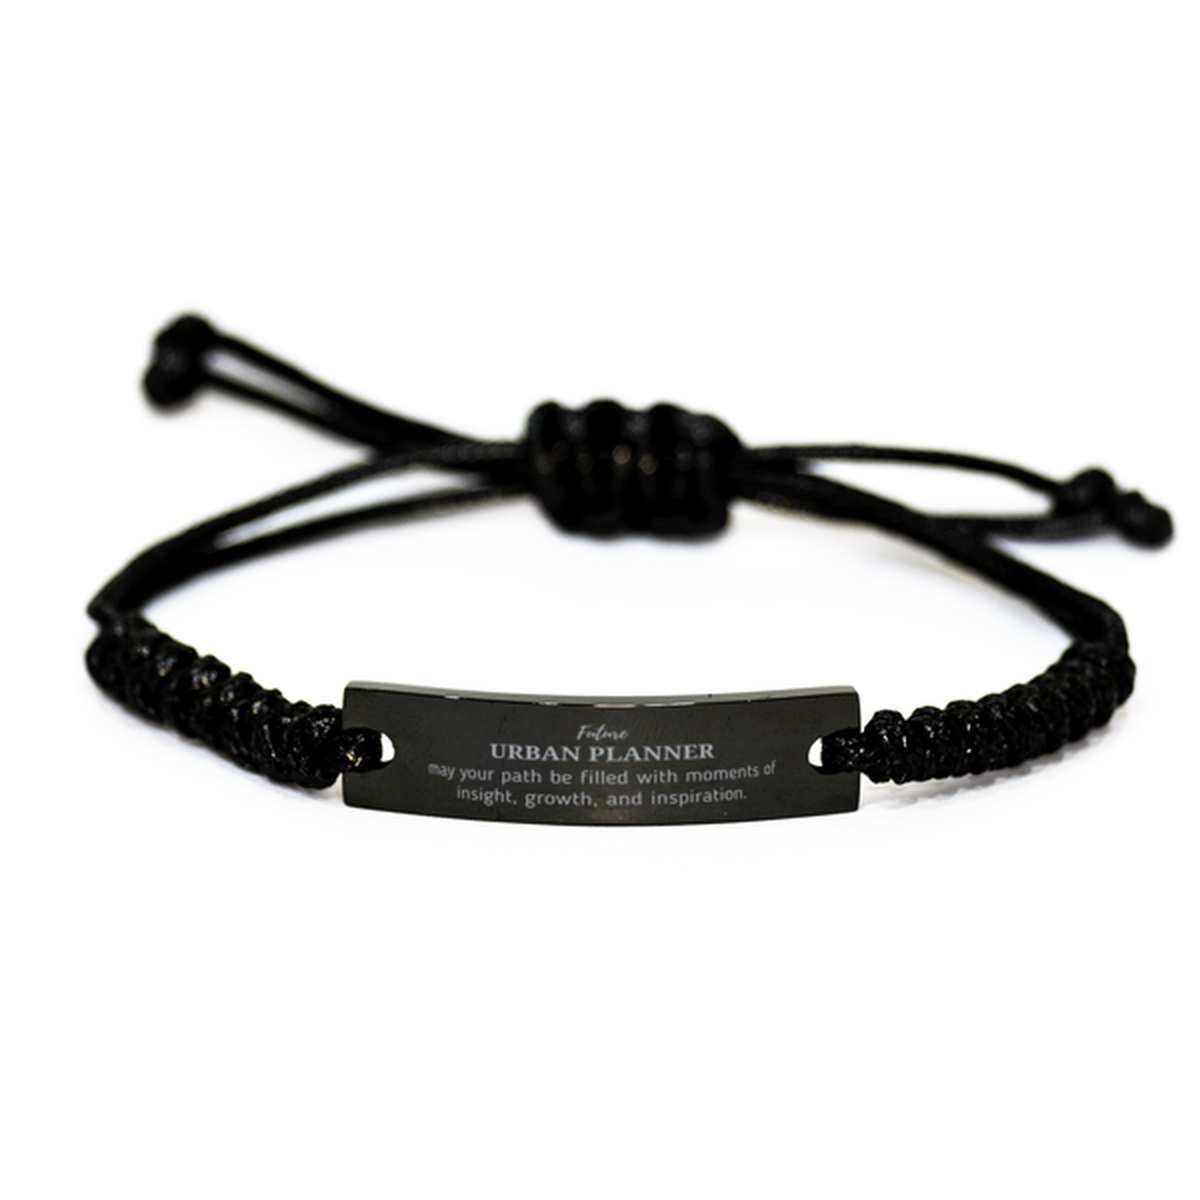 Future Urban Planner Gifts, May your path be filled with moments of insight, Graduation Gifts for New Urban Planner, Christmas Unique Black Rope Bracelet For Men, Women, Friends